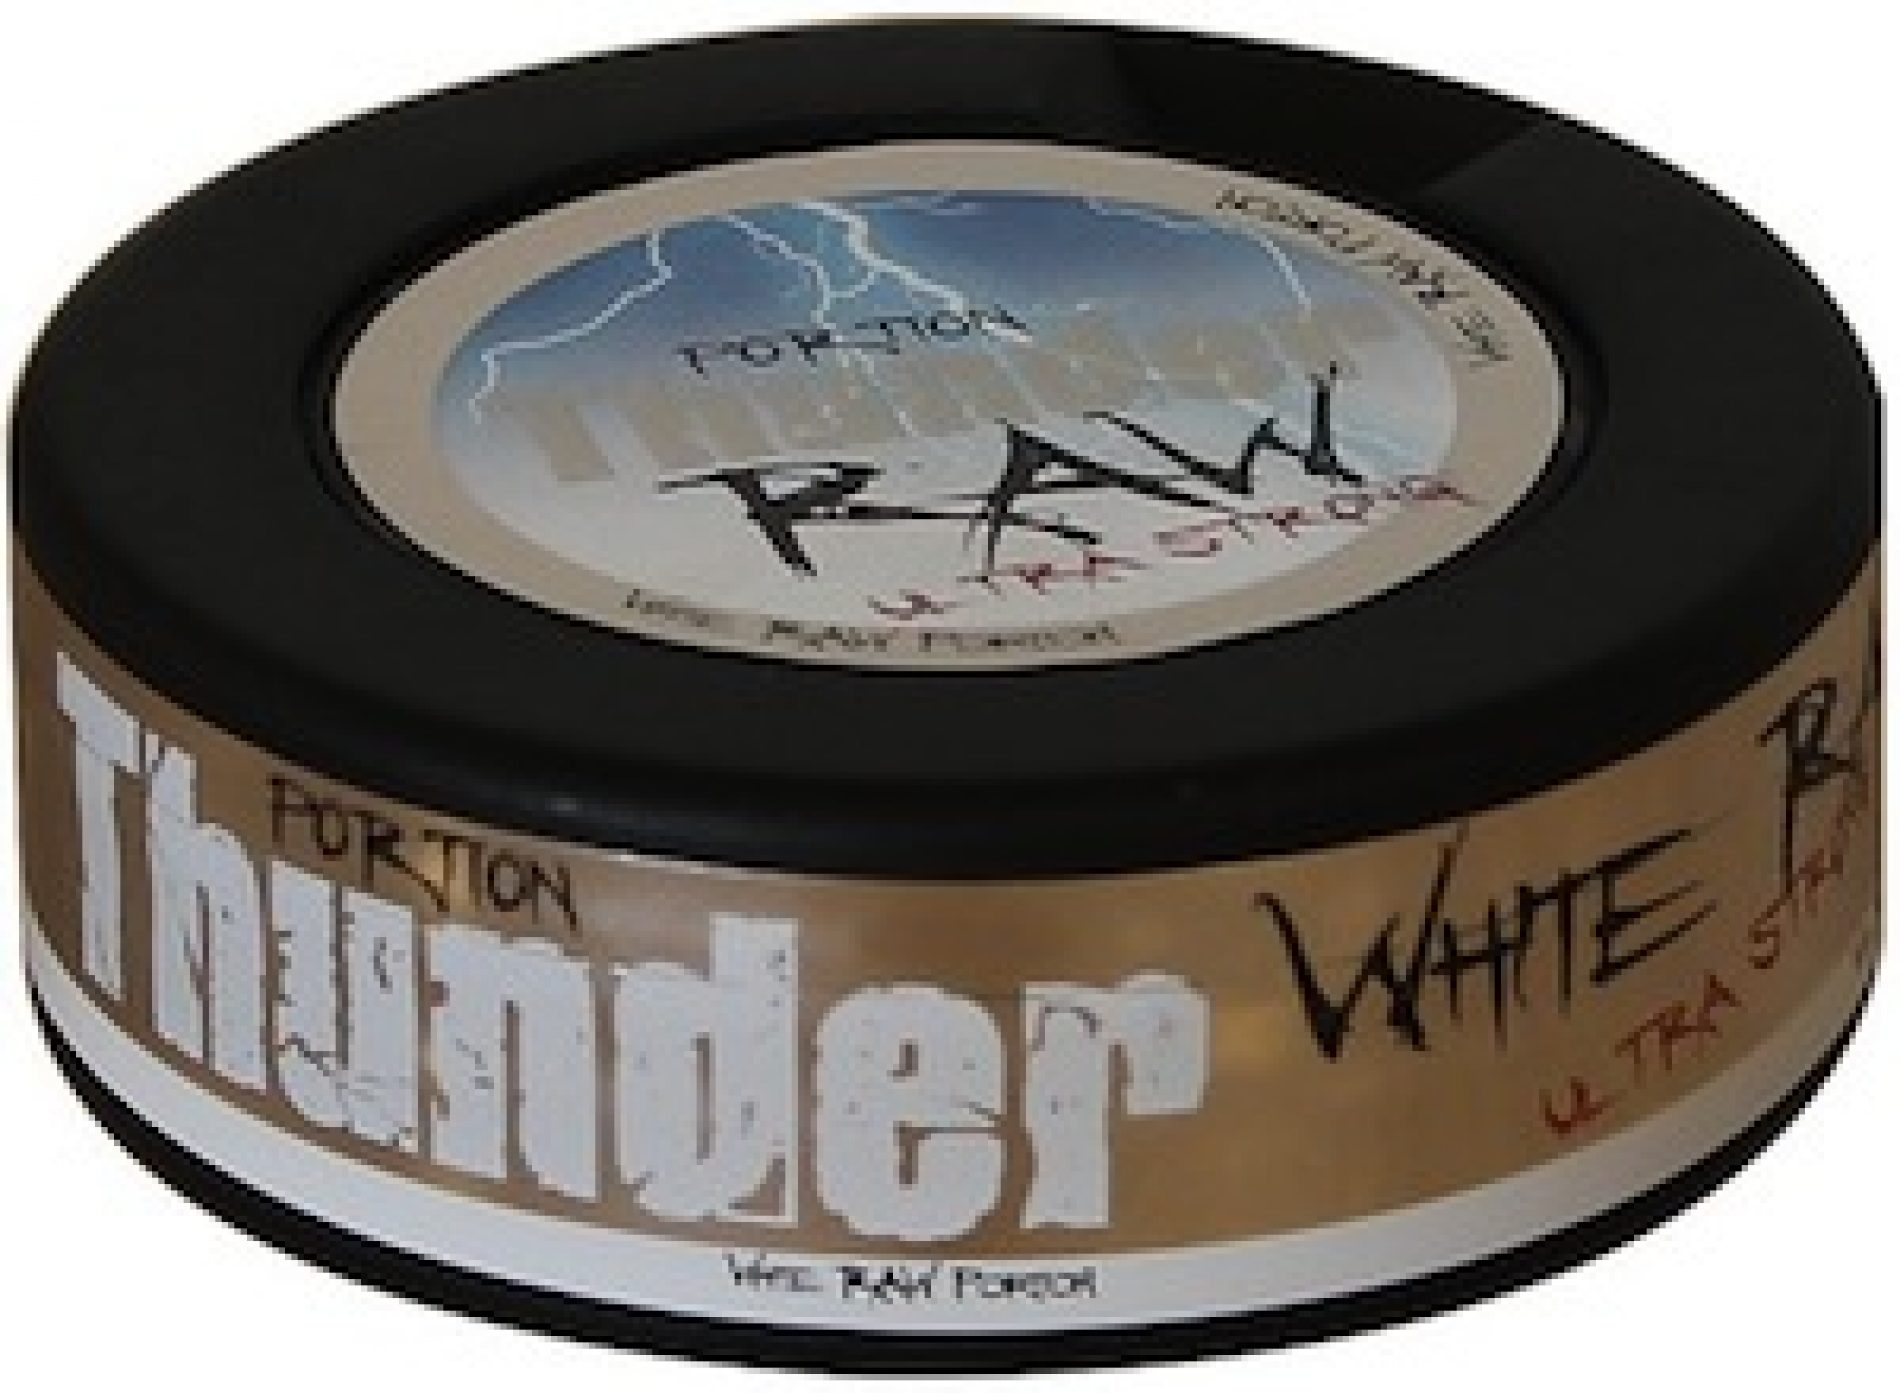 Thunder White Frosted Ultra Strong (RAW) Portion Snus:  Reviewing V2 Tobacco’s Strongest White Portion Snus